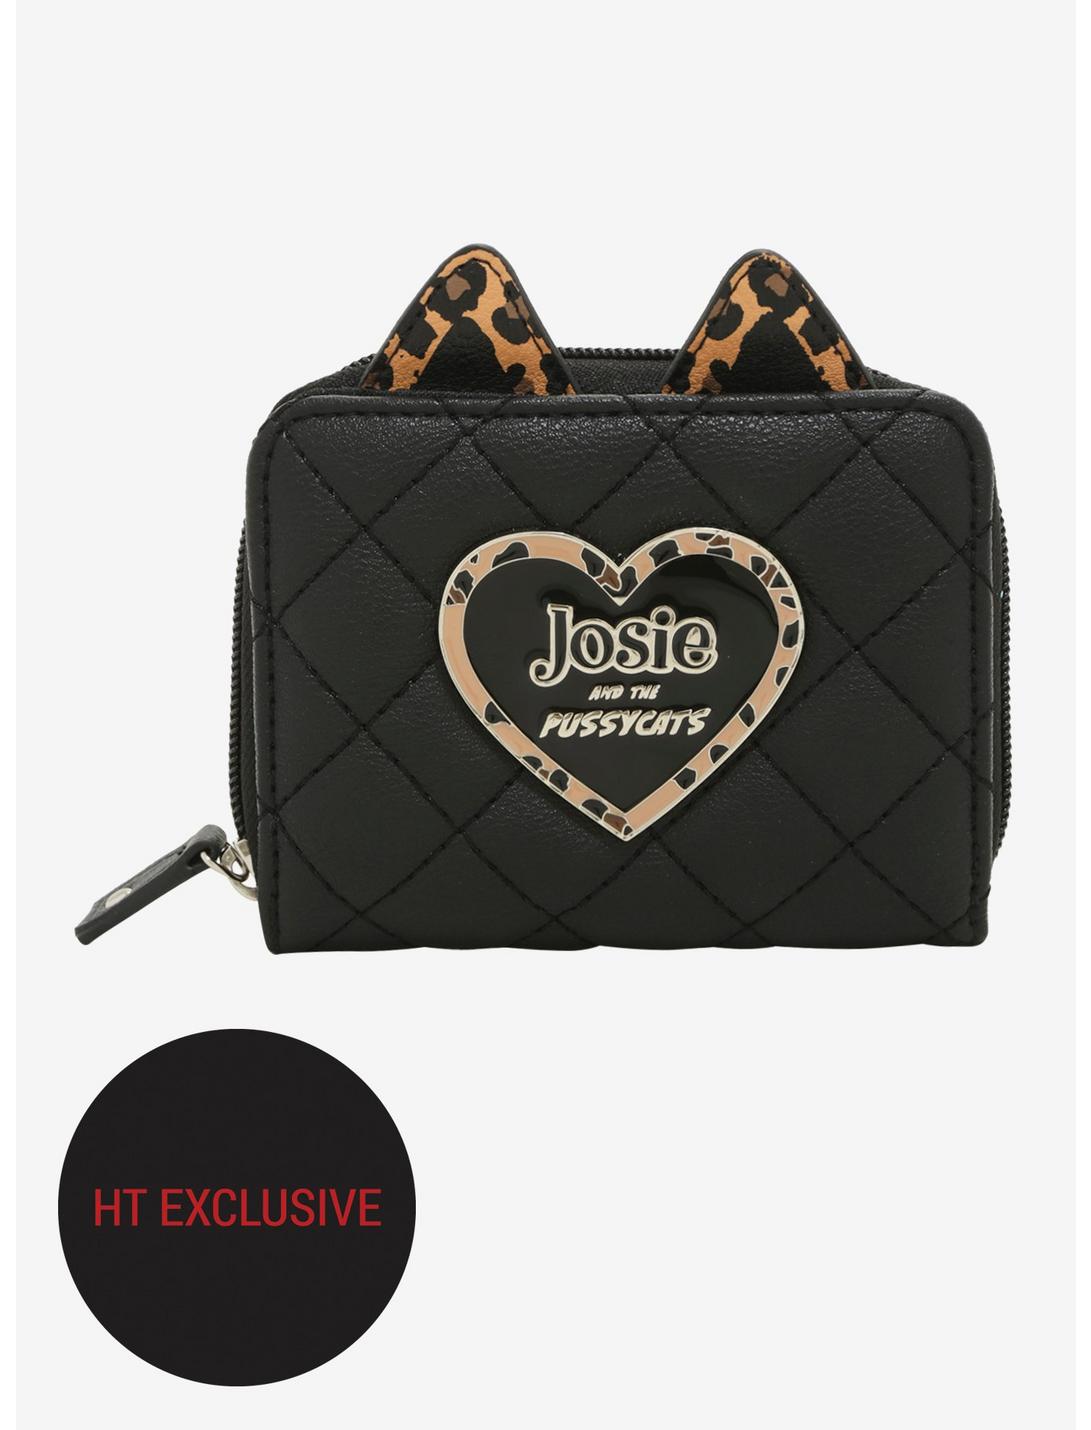 Riverdale Josie And The Pussycats Wallet Hot Topic Exclusive, , hi-res